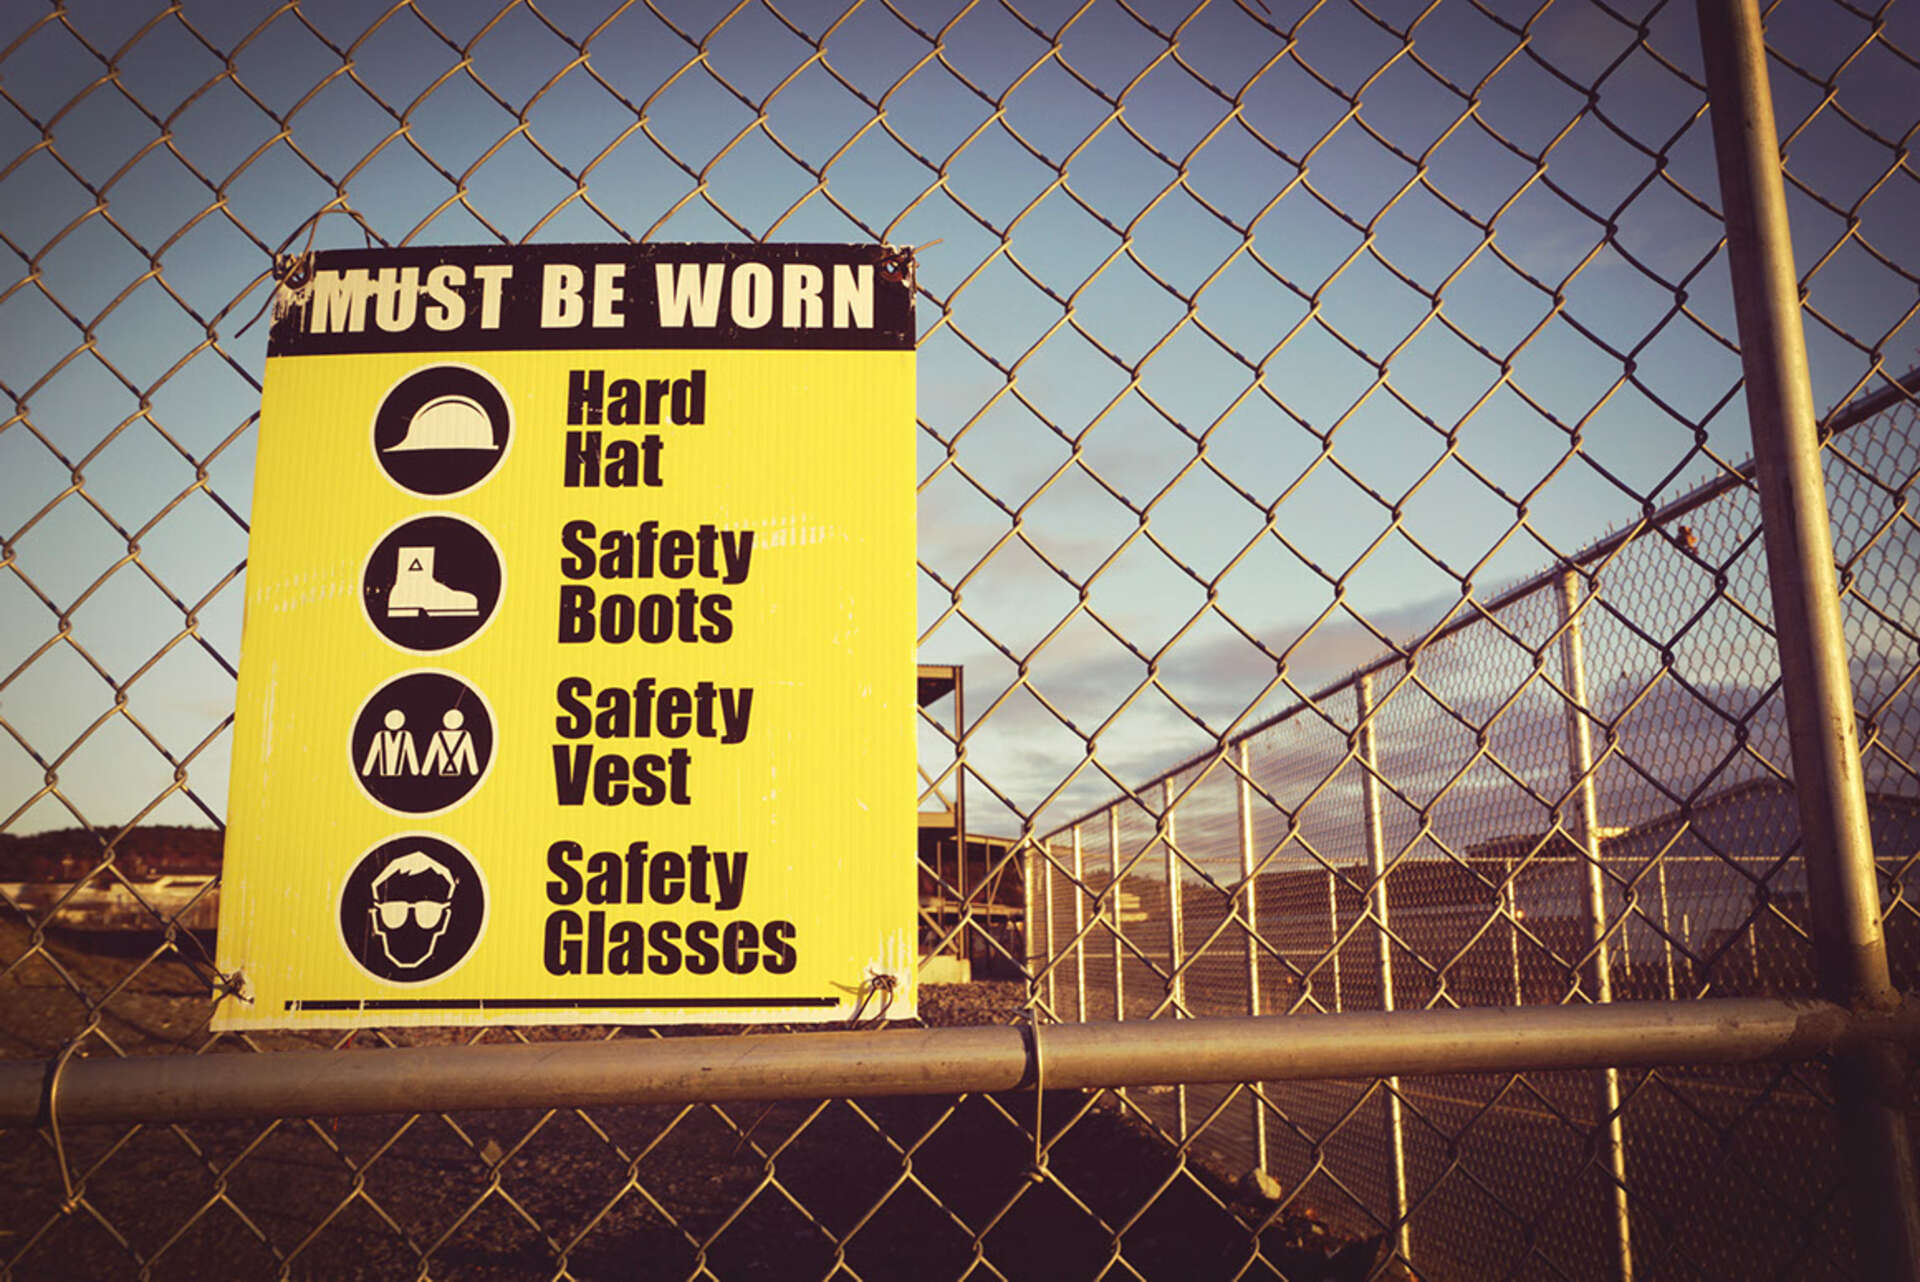 photo of safety sign illustrating what safety equipment must be worn